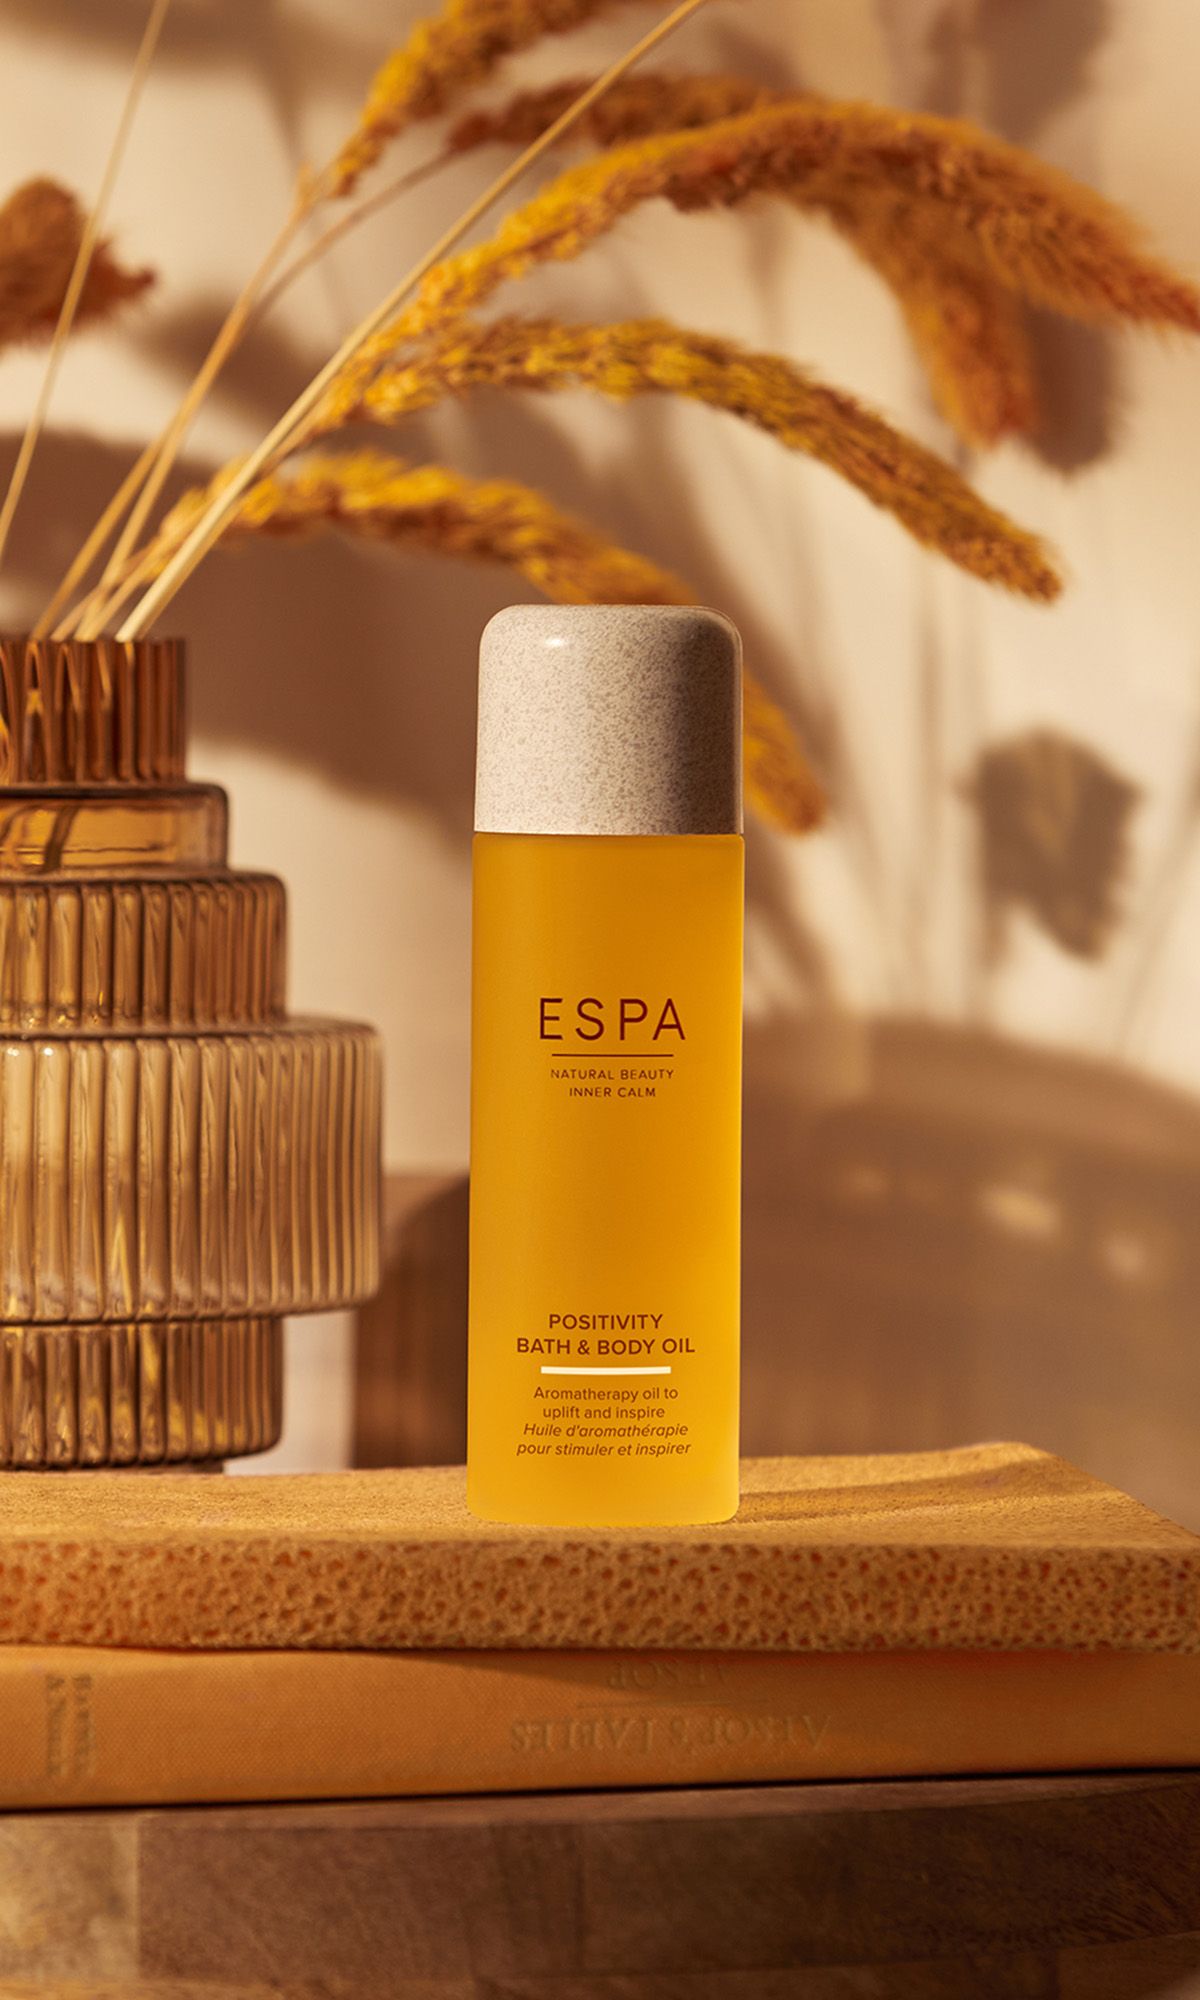 Espa bath and body oil product displayed on wooden bed-side table